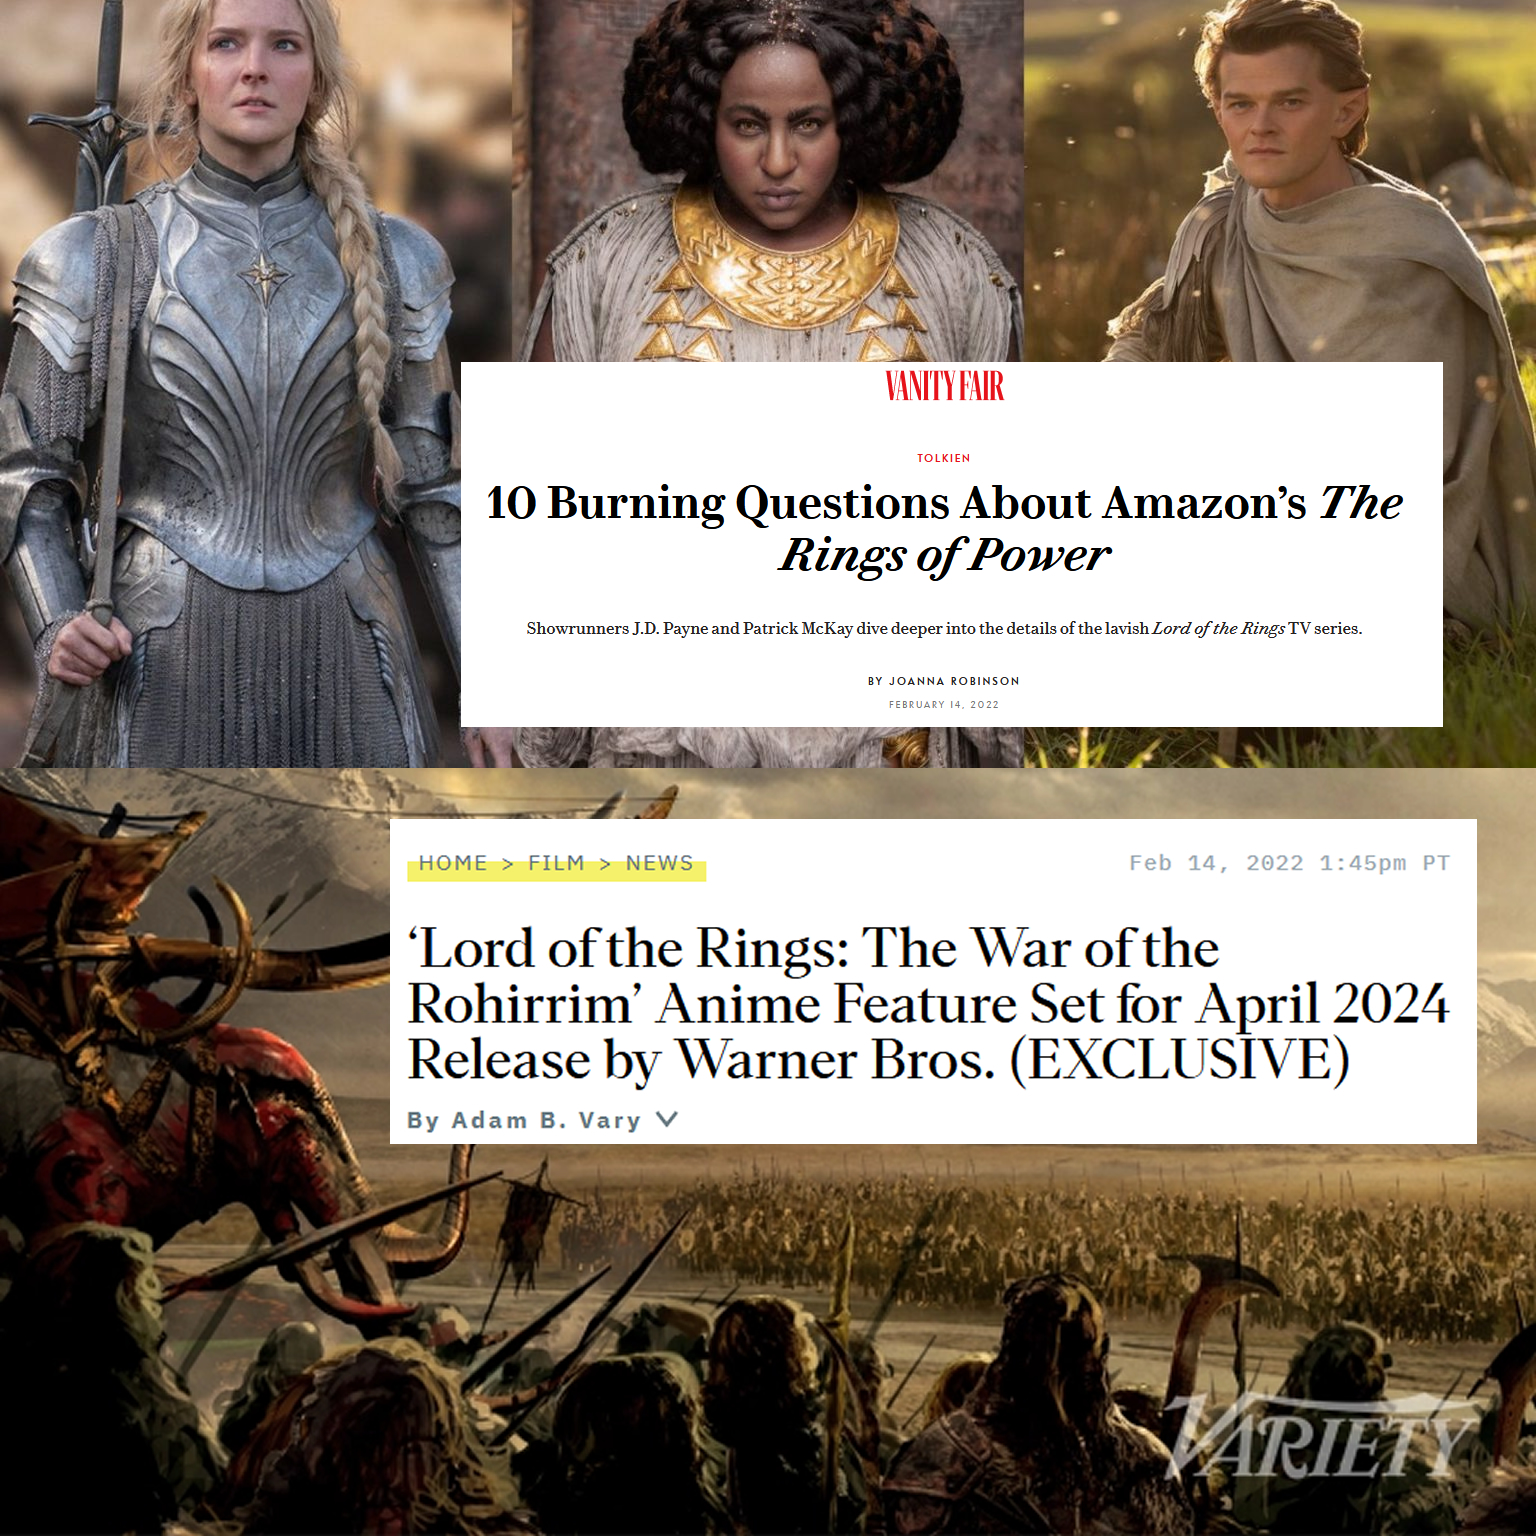 Warner Bros. plans anime movie in 'Lord of the Rings' series | GMA News  Online